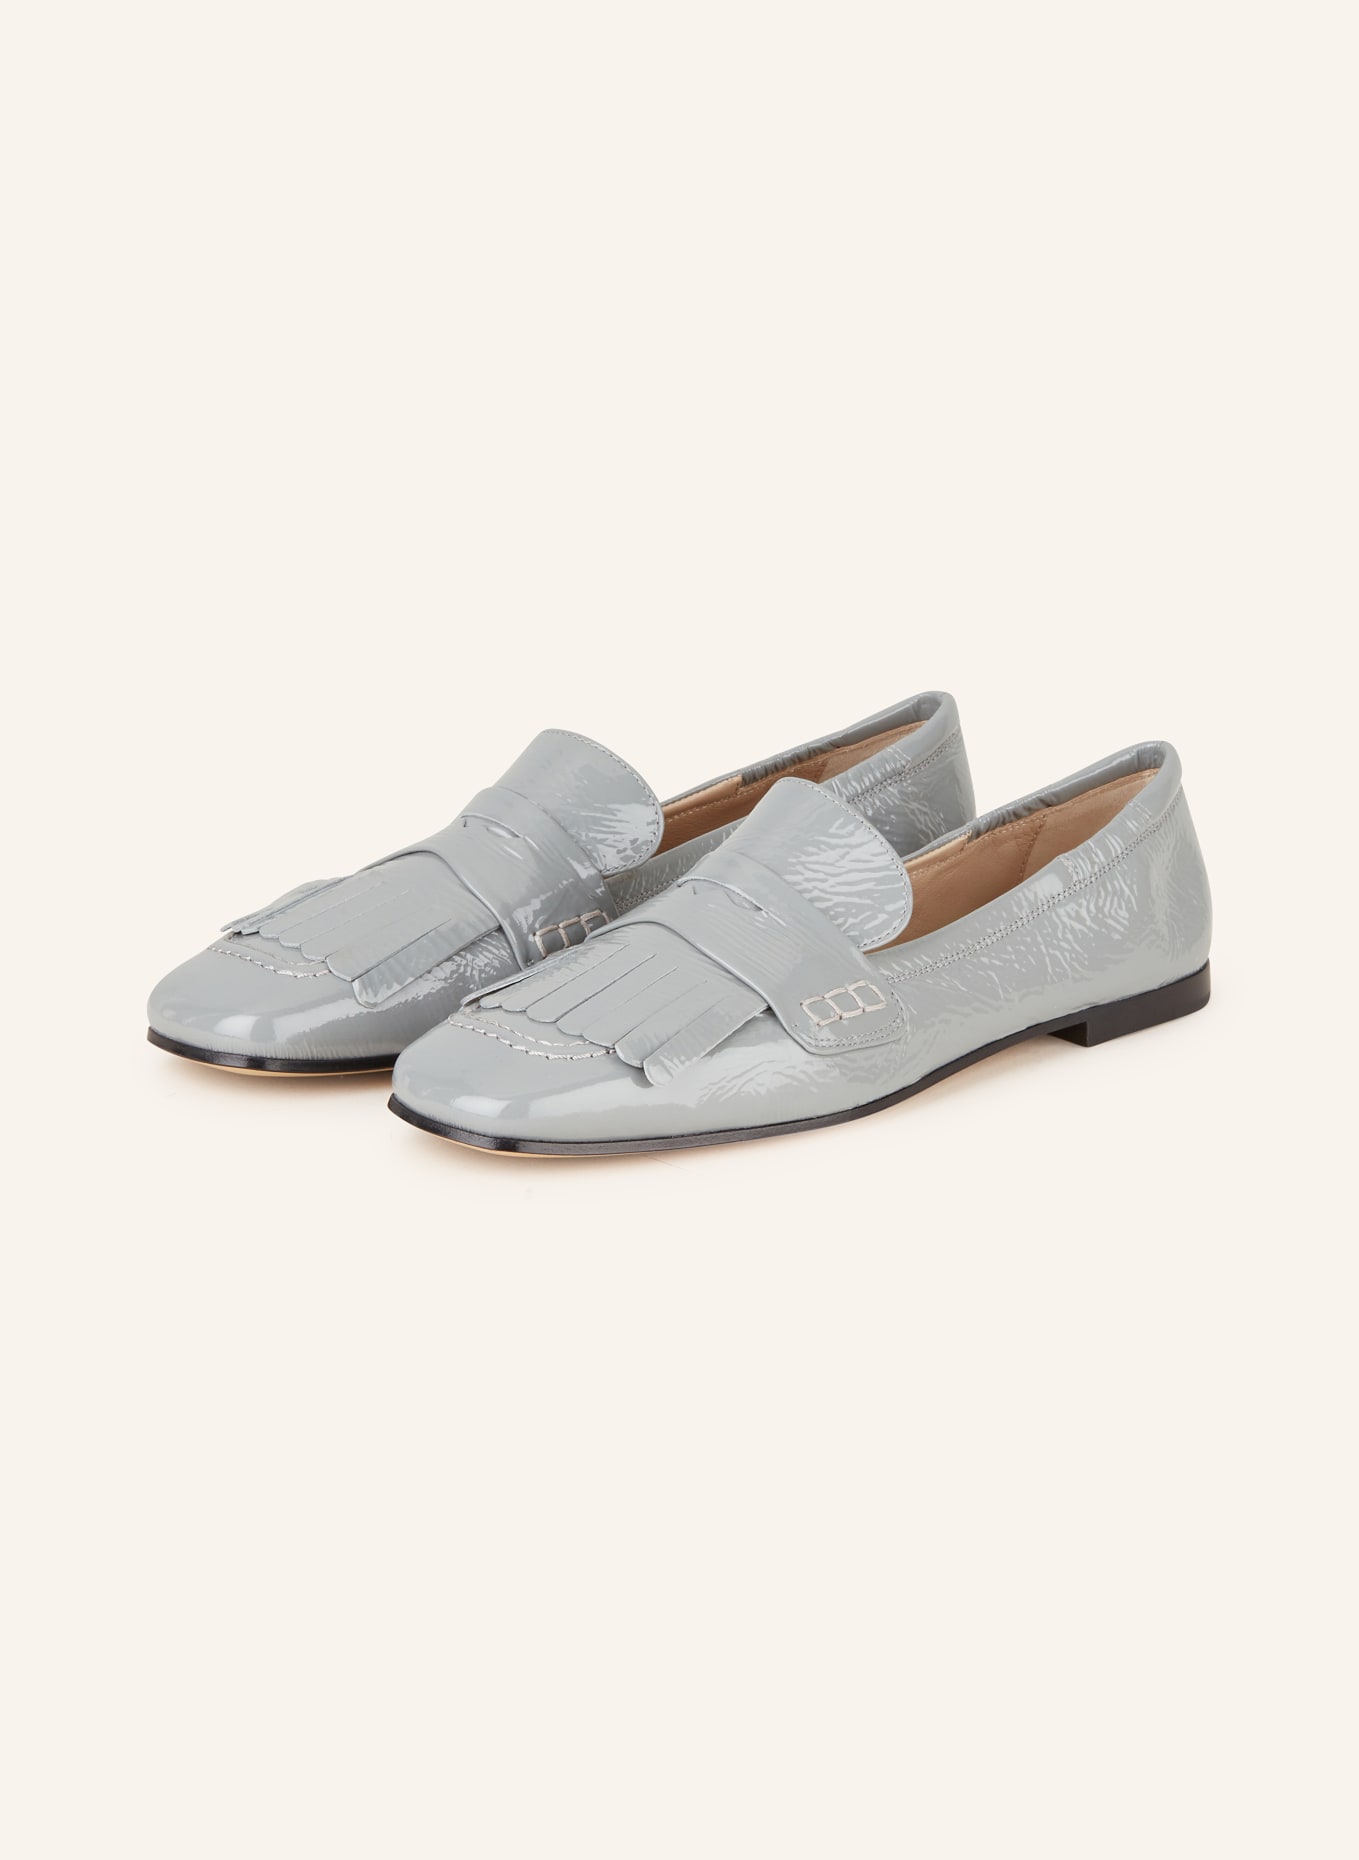 POMME D'OR Penny-Loafer ANGIE, Farbe: GRAU (Bild 1)